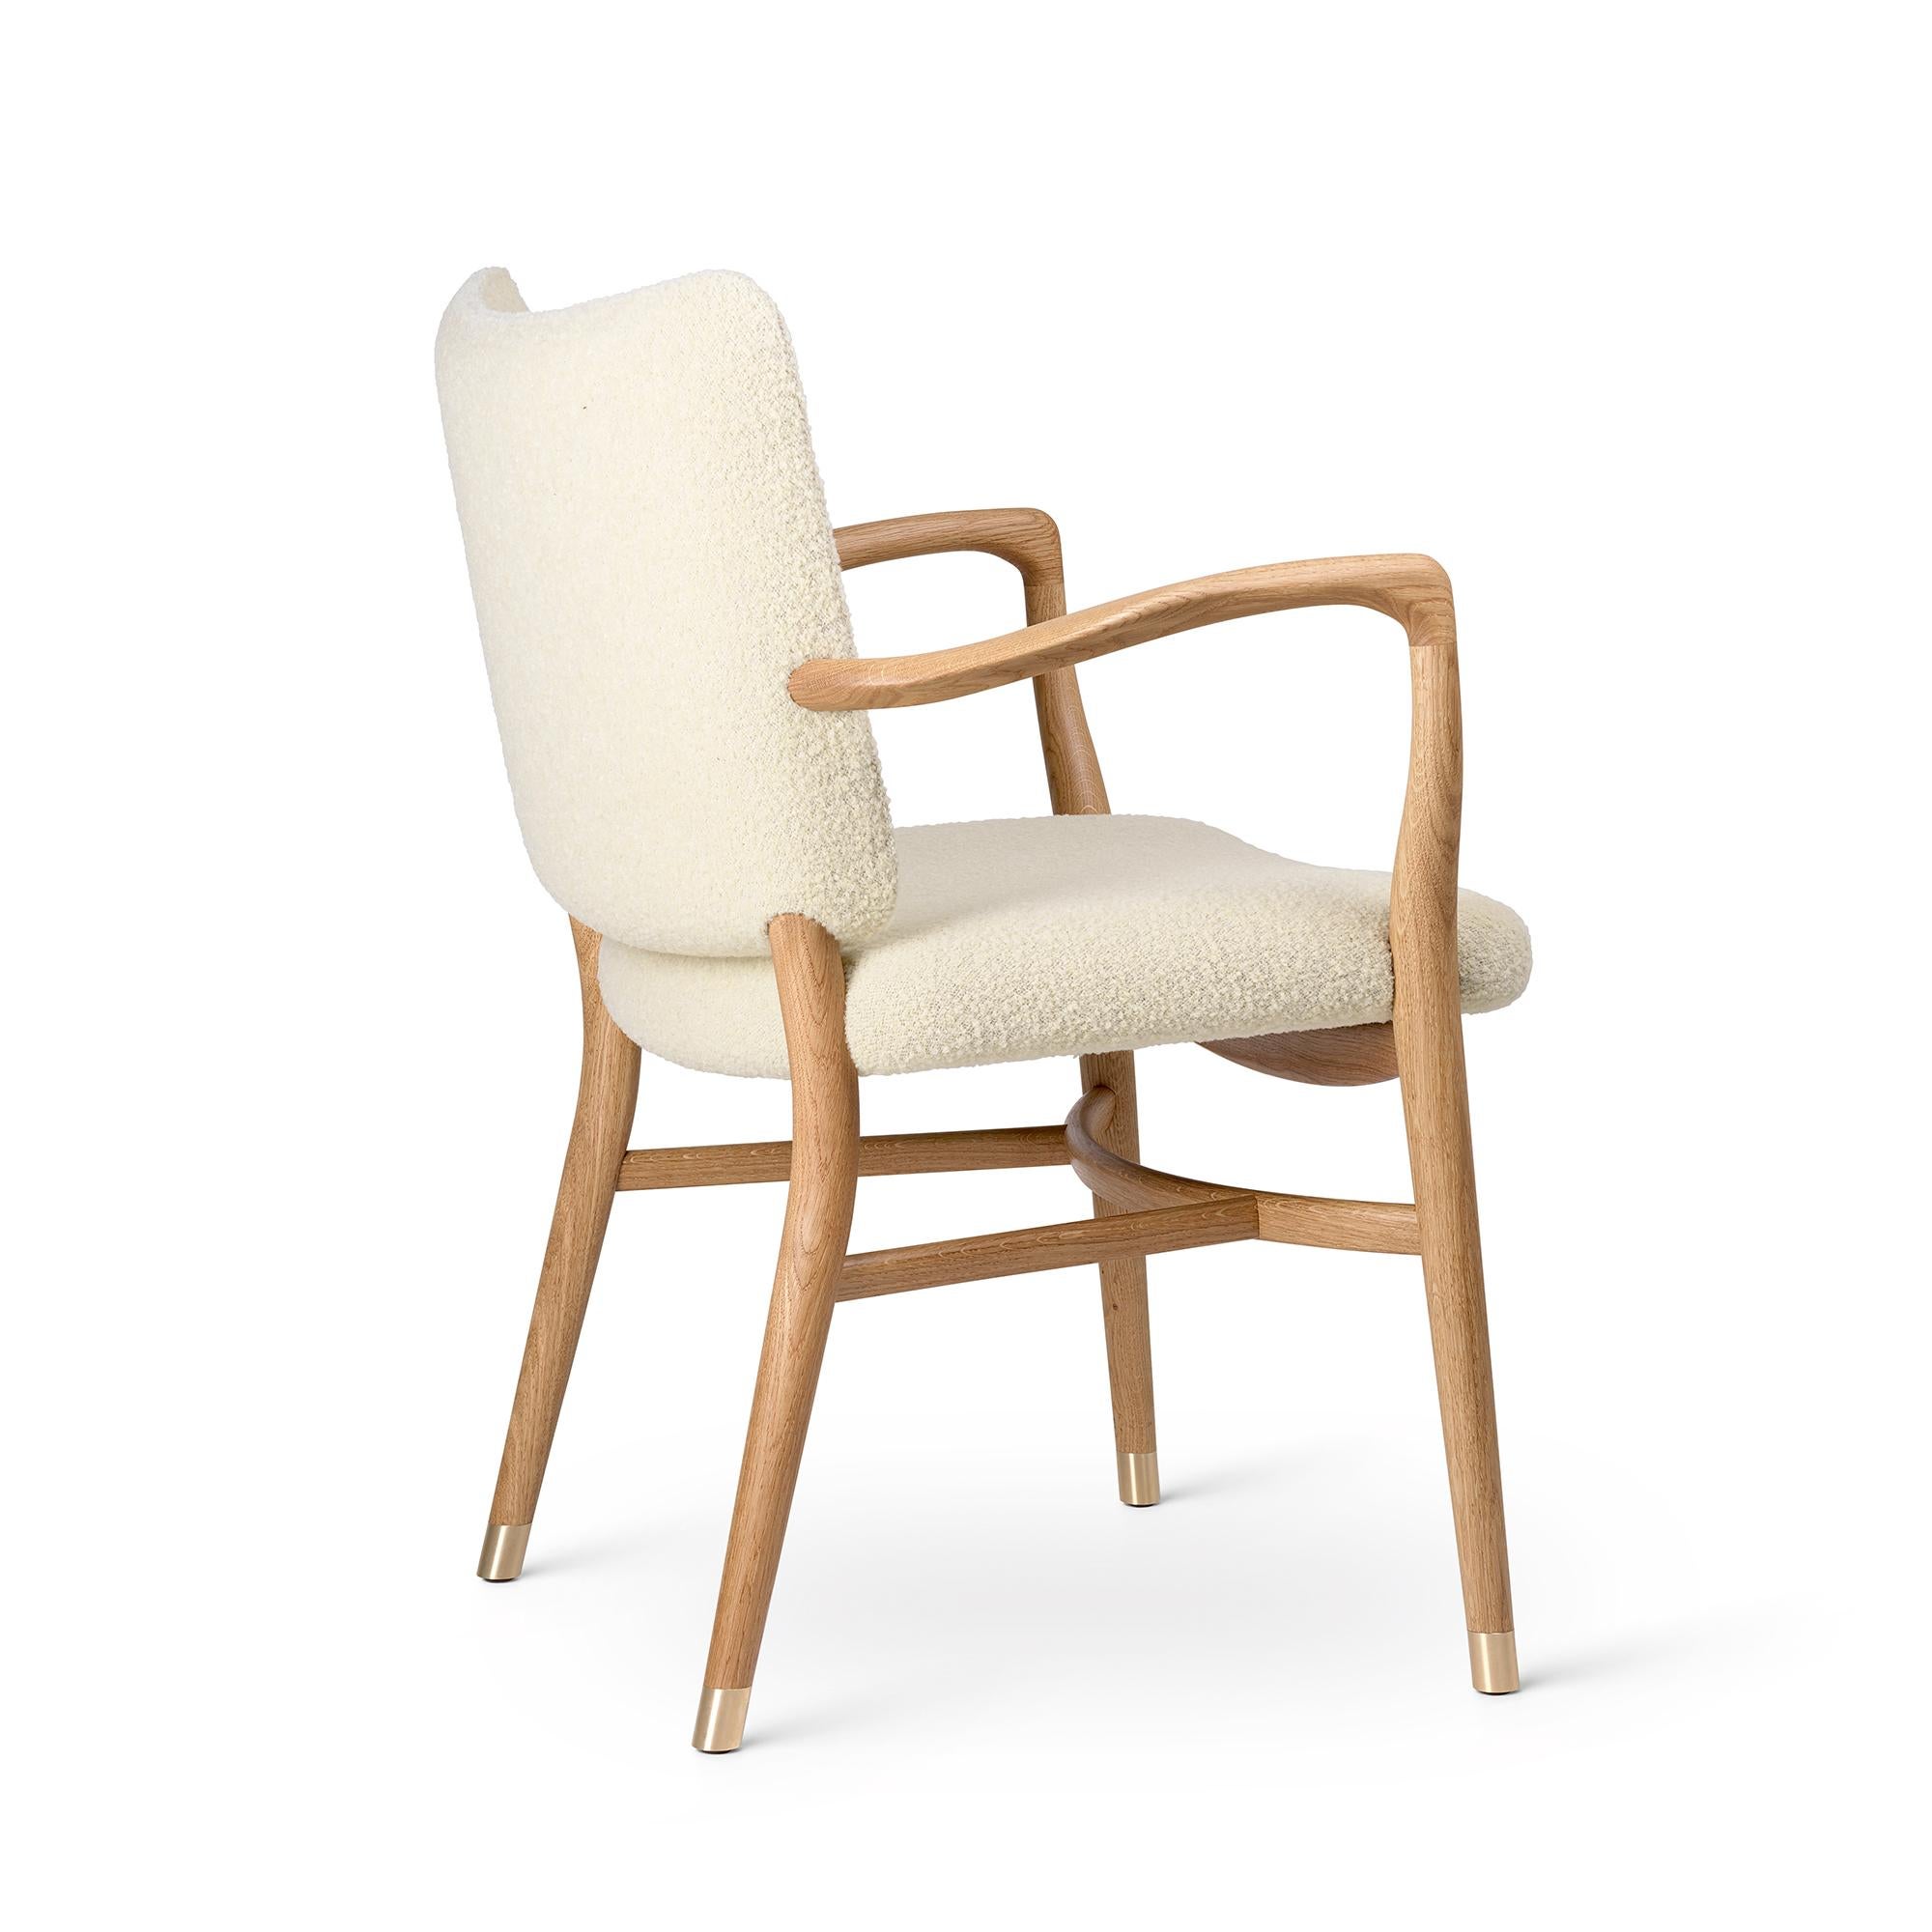 Vilhelm Lauritzen 'VLA61' Chair in Oak Oil and Fabric for Carl Hansen & Son.

The story of Danish Modern begins in 1908 when Carl Hansen opened his first workshop. His firm commitment to beauty, comfort, refinement, and craftsmanship is evident in